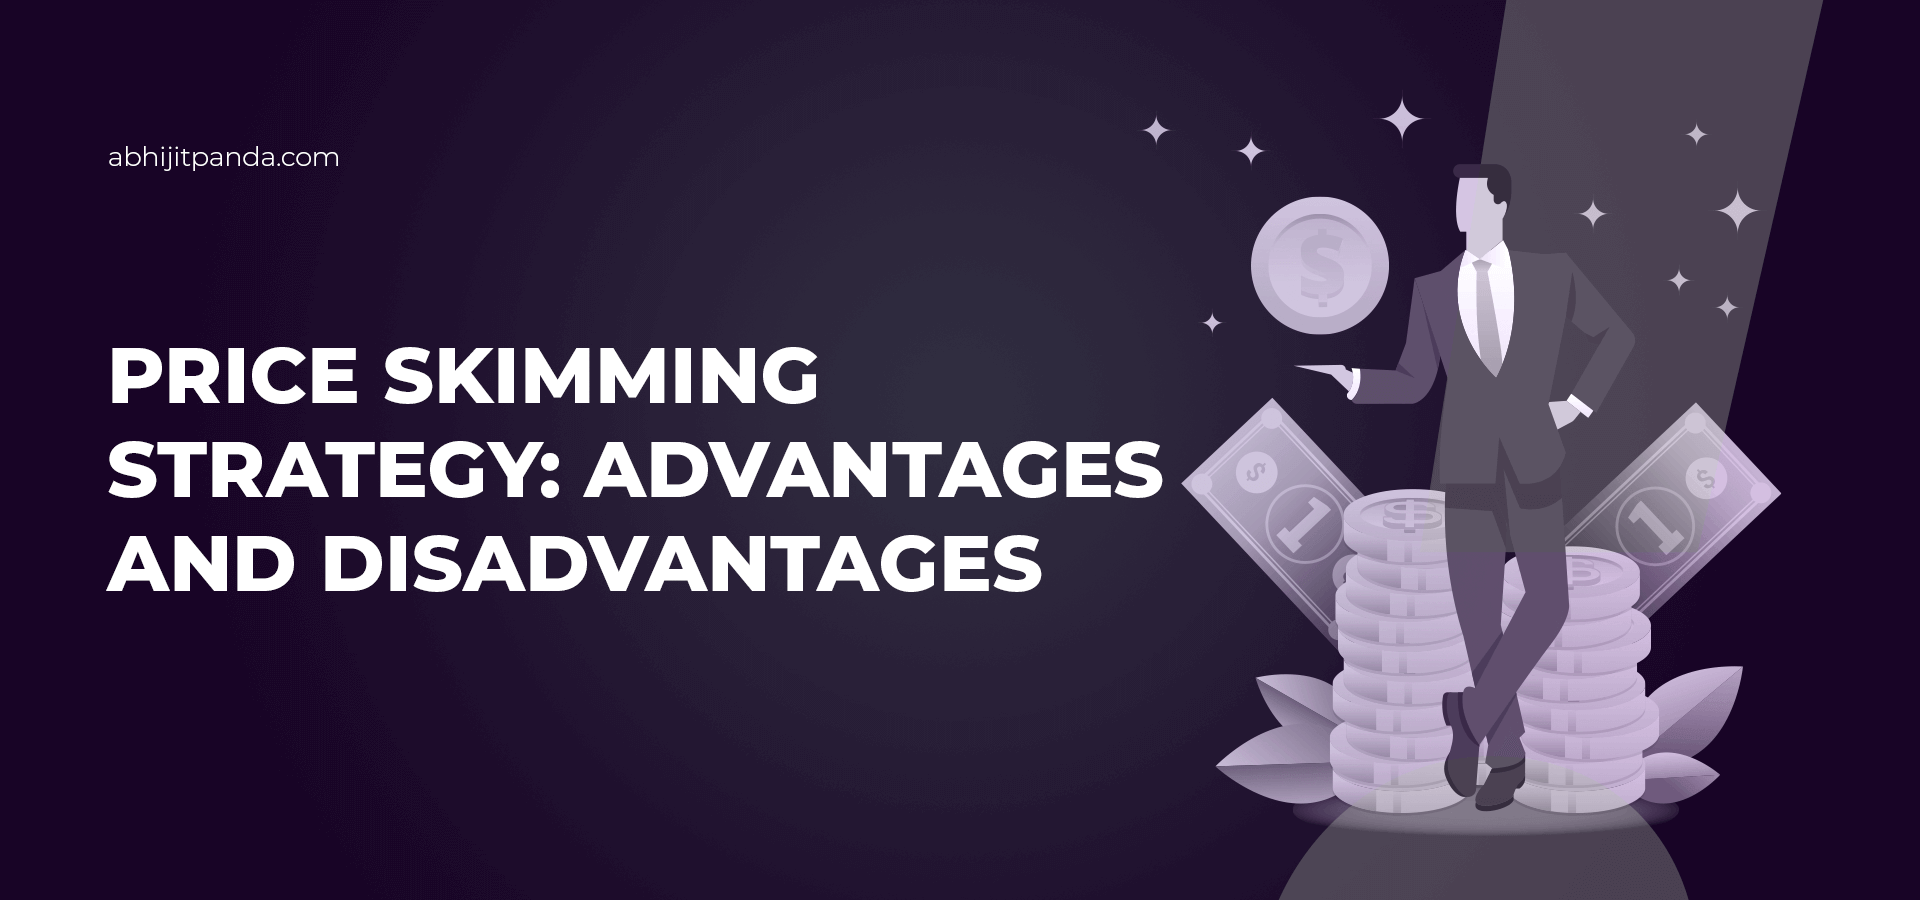 Price Skimming Strategy Advantages and Disadvantages